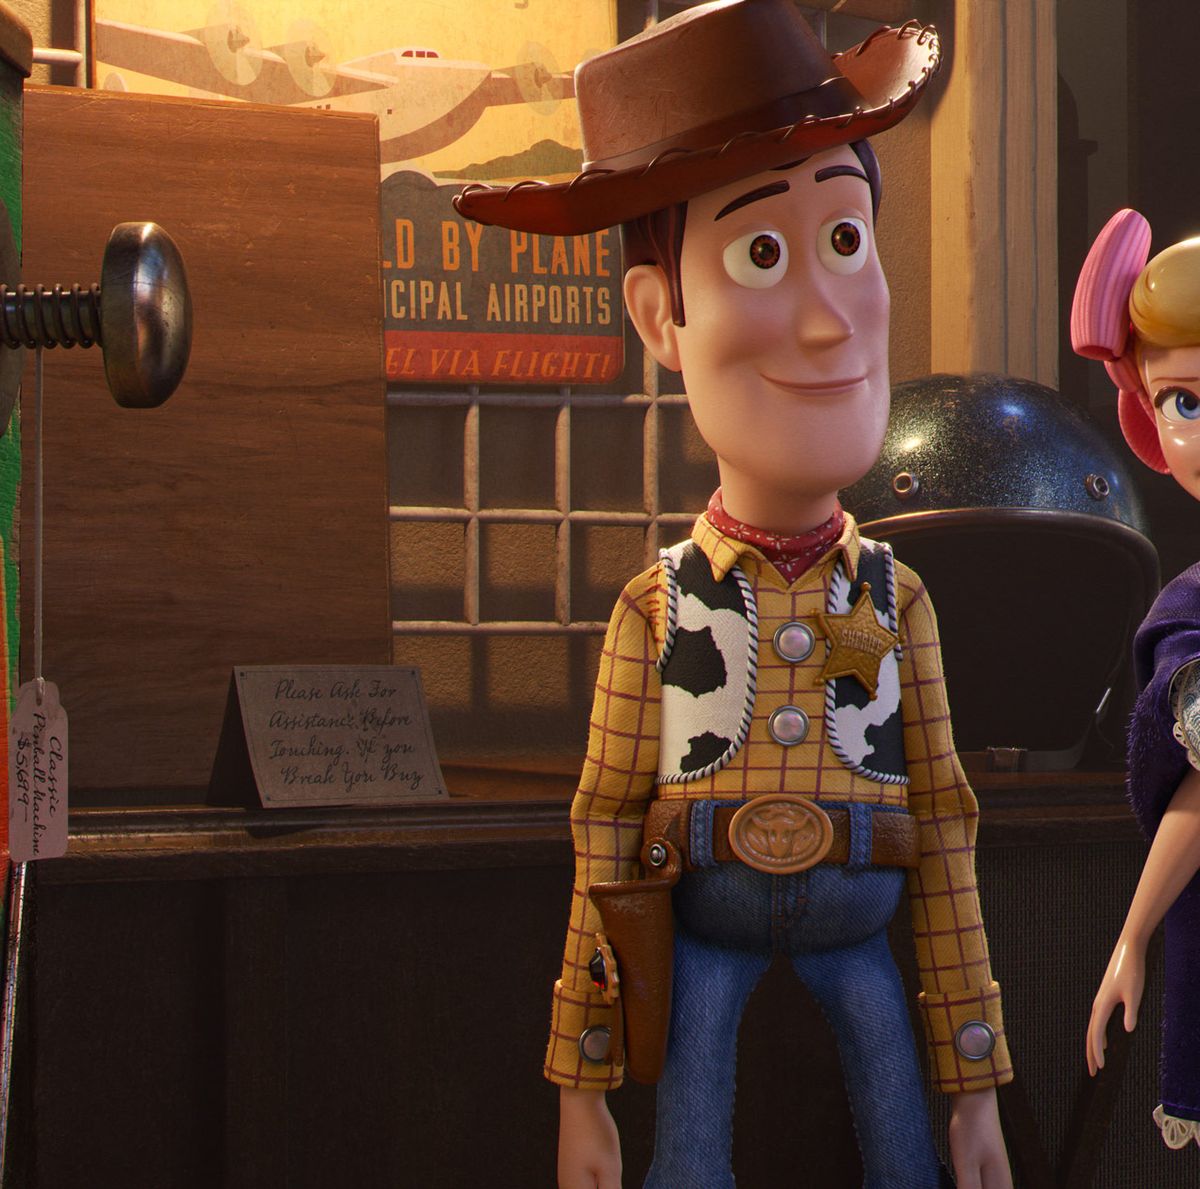 Toy Story 5 rumors say Andy will return in fifth film